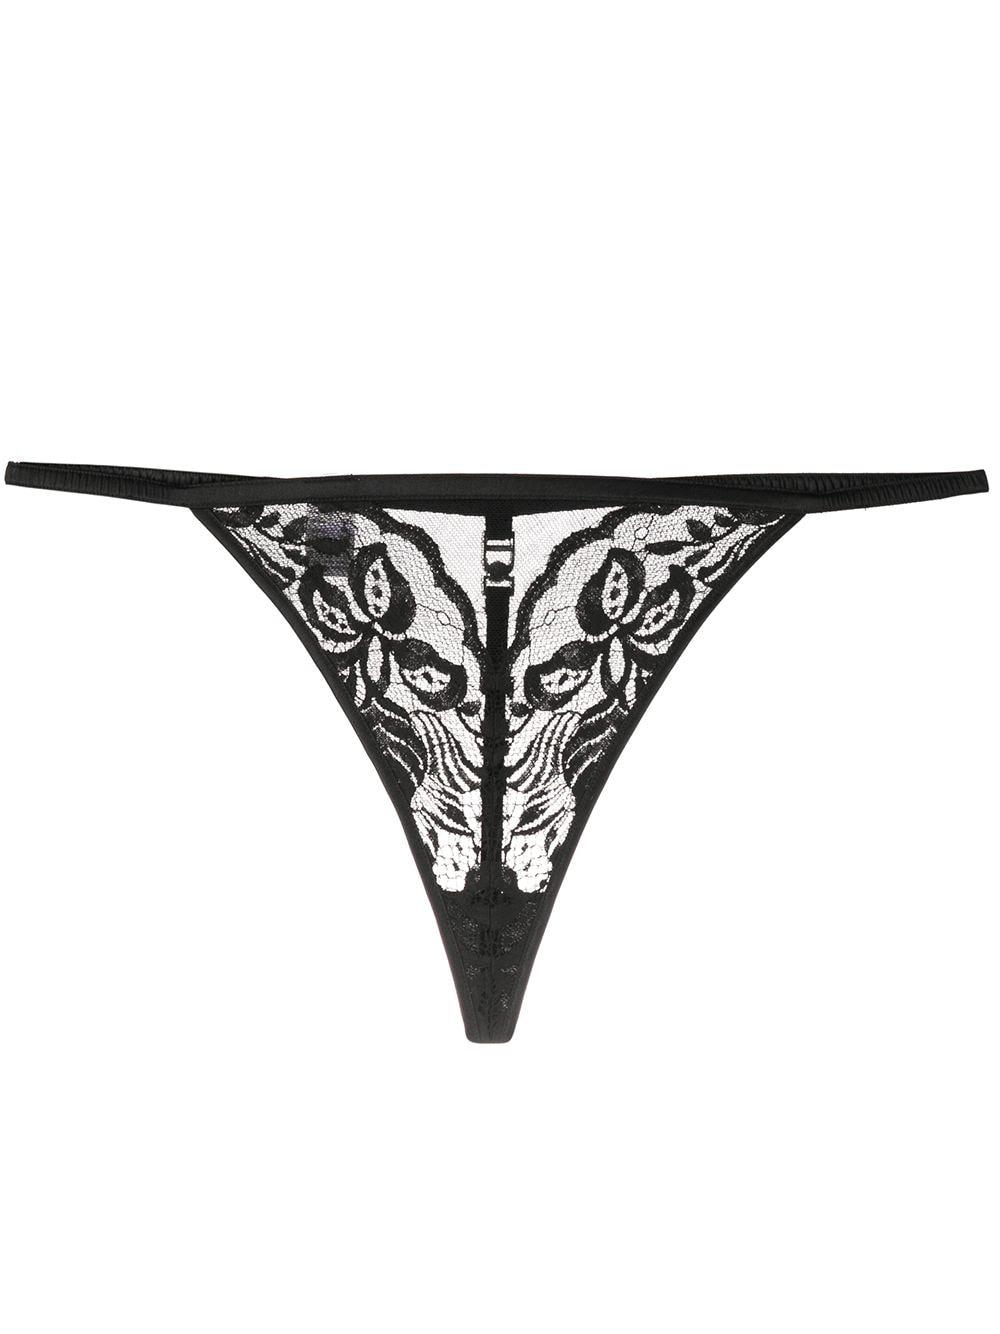 Dior Floral Lace Monogram Detail Thong in Black | Lyst